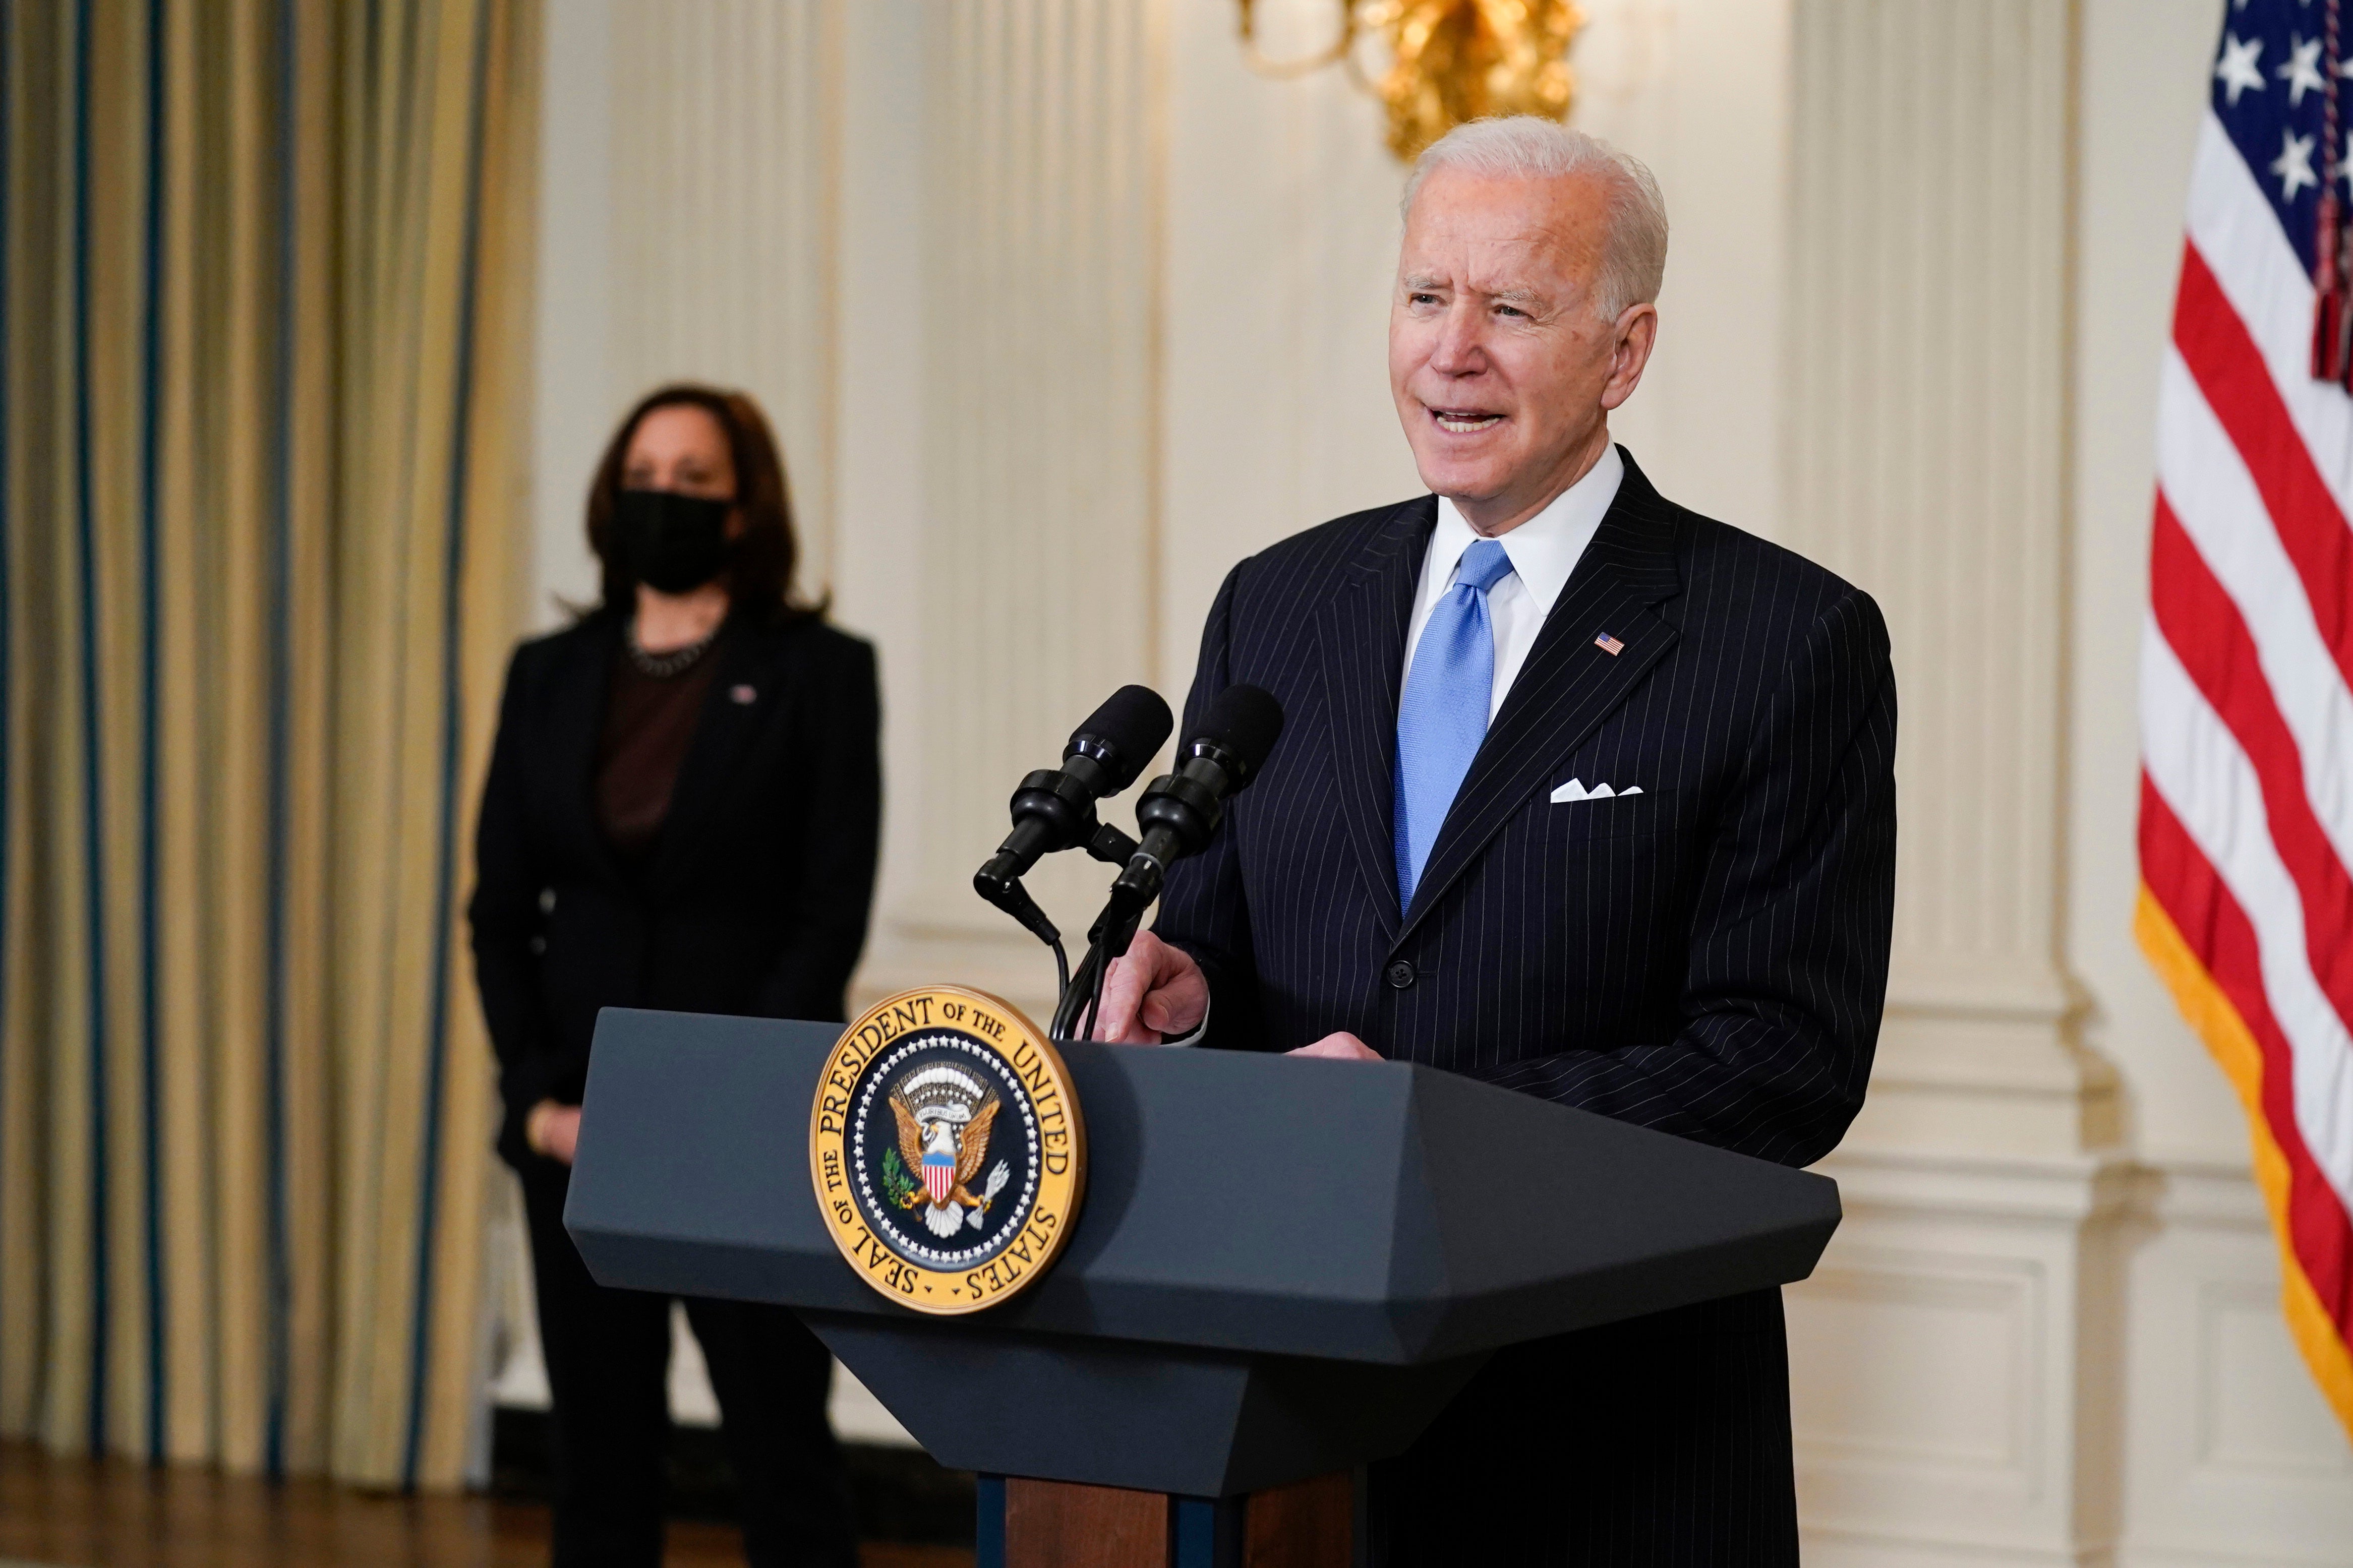 Forty-three days into his presidency, Joe Biden has yet to hold a formal White House press conference.